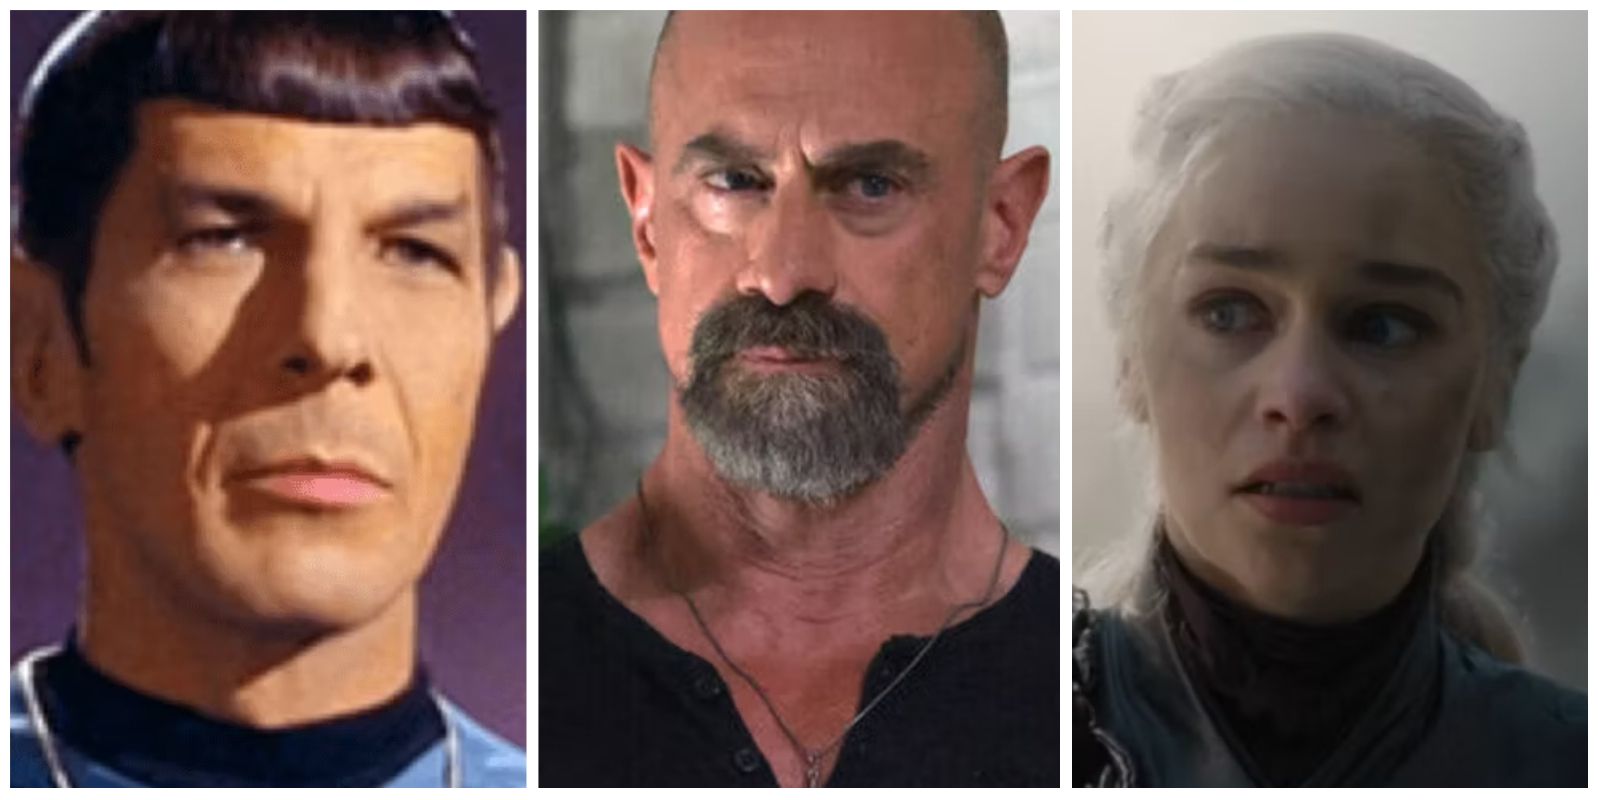 three way image of Star Trek's Spock, Law & Order's Stabler, and Game of Thrones' Daenerys